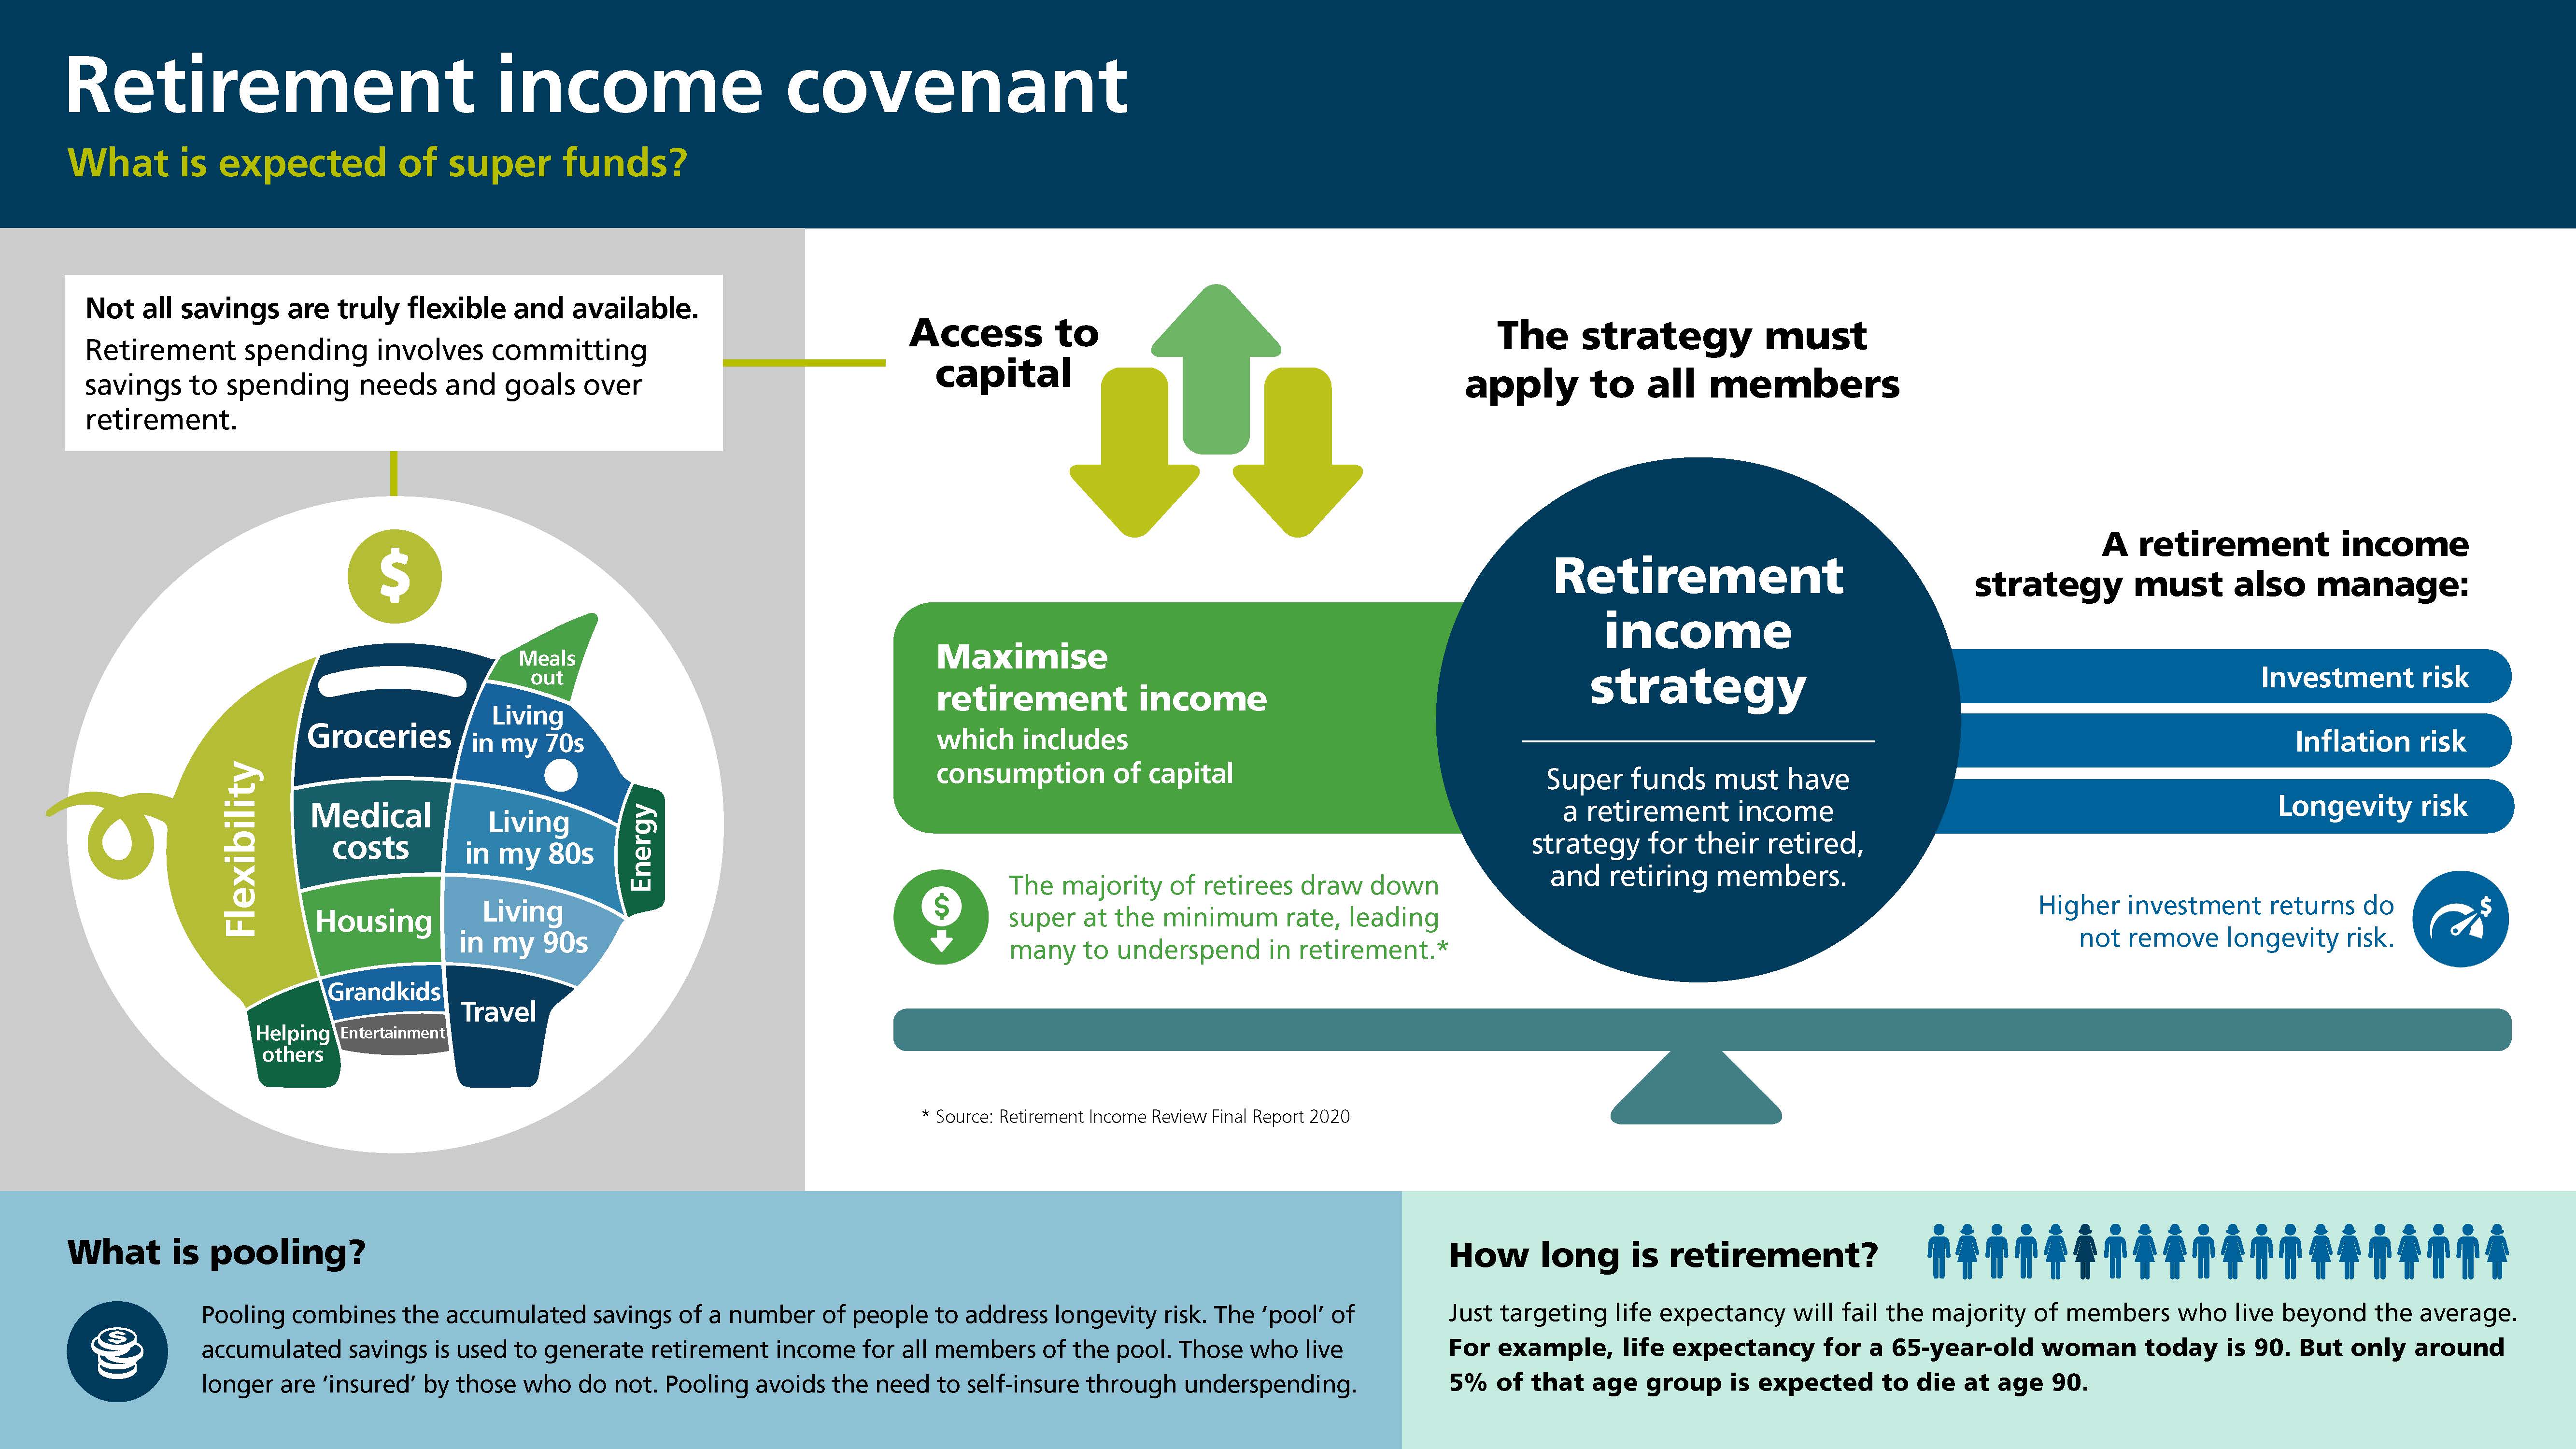 Implementing a retirement income strategy